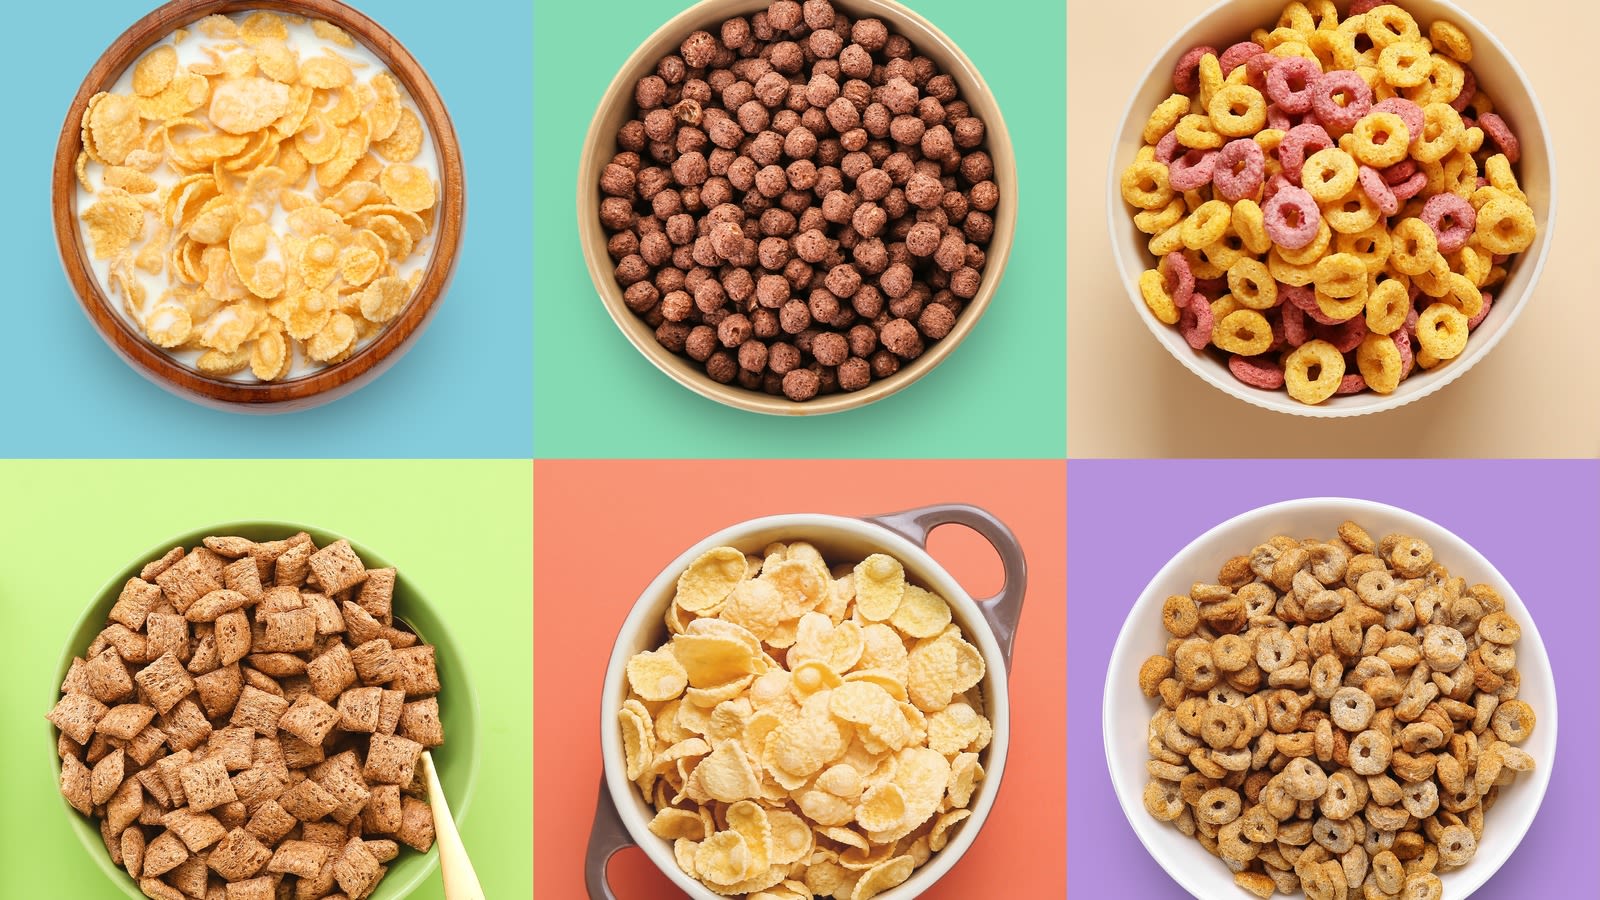 The Gluten-Free Cereal That's Not Worth Its High Price